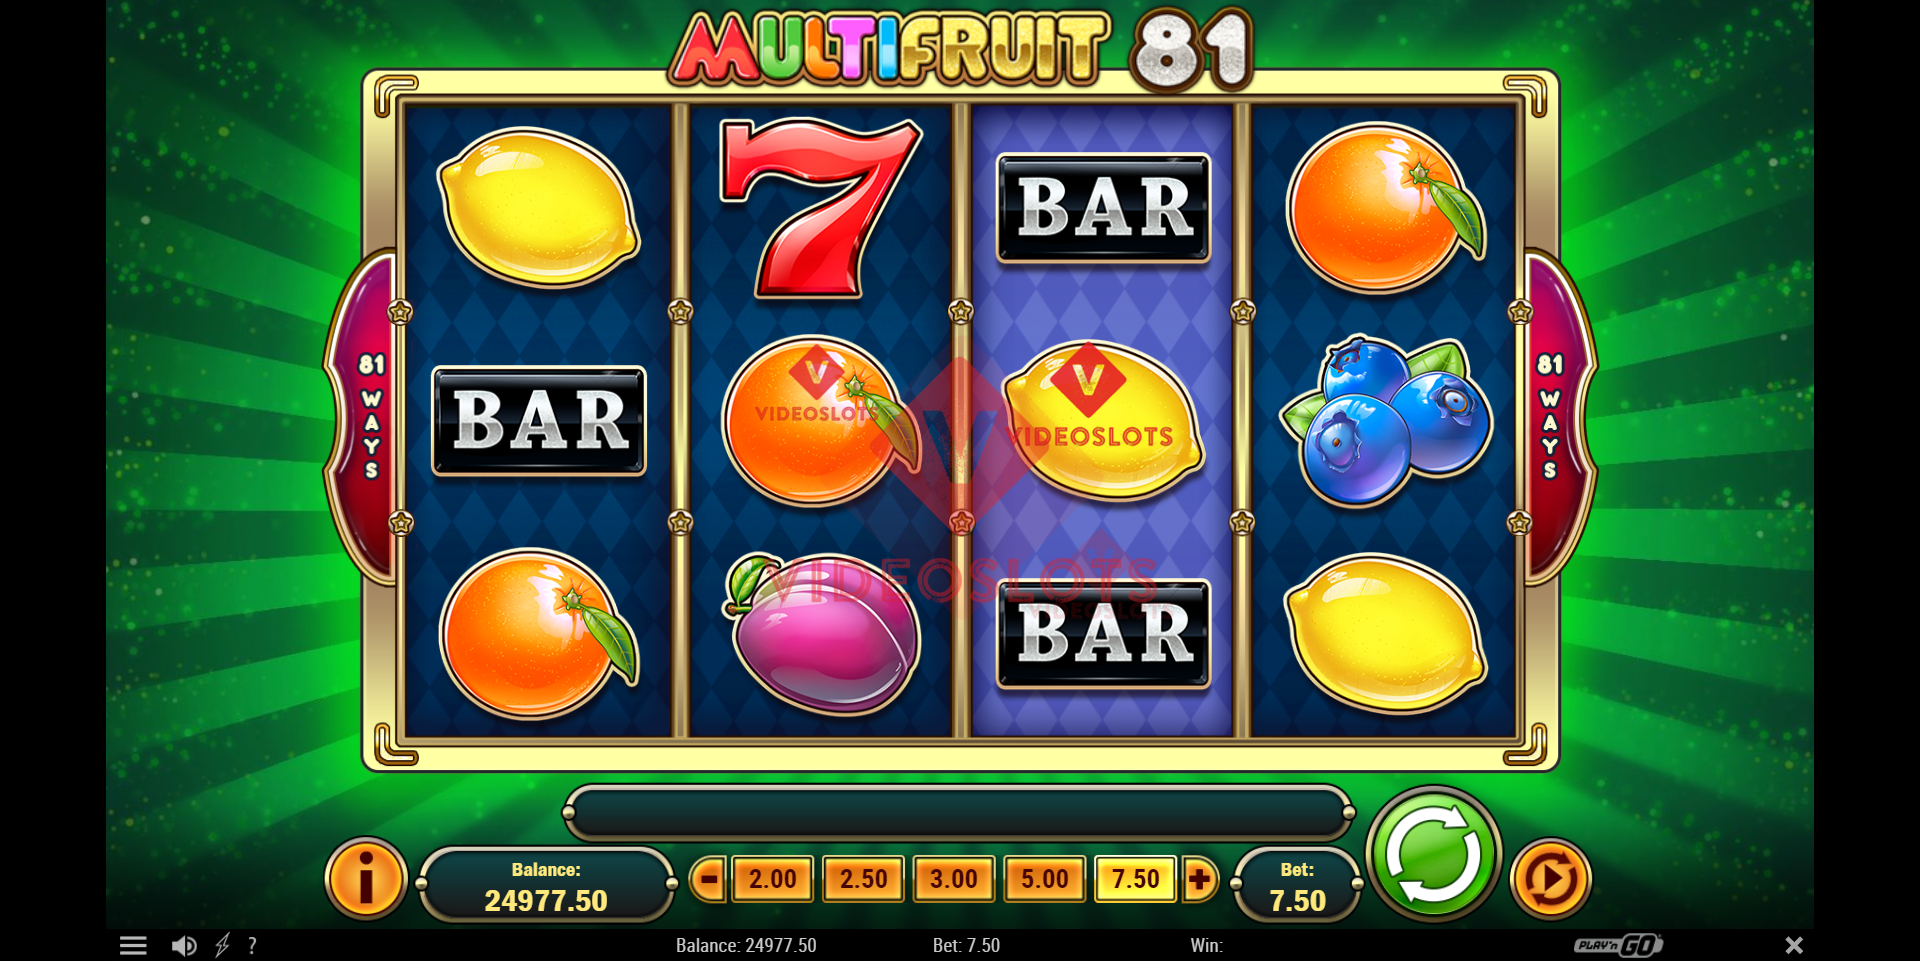 Base Game for Multifruit 81 slot from Play'n Go